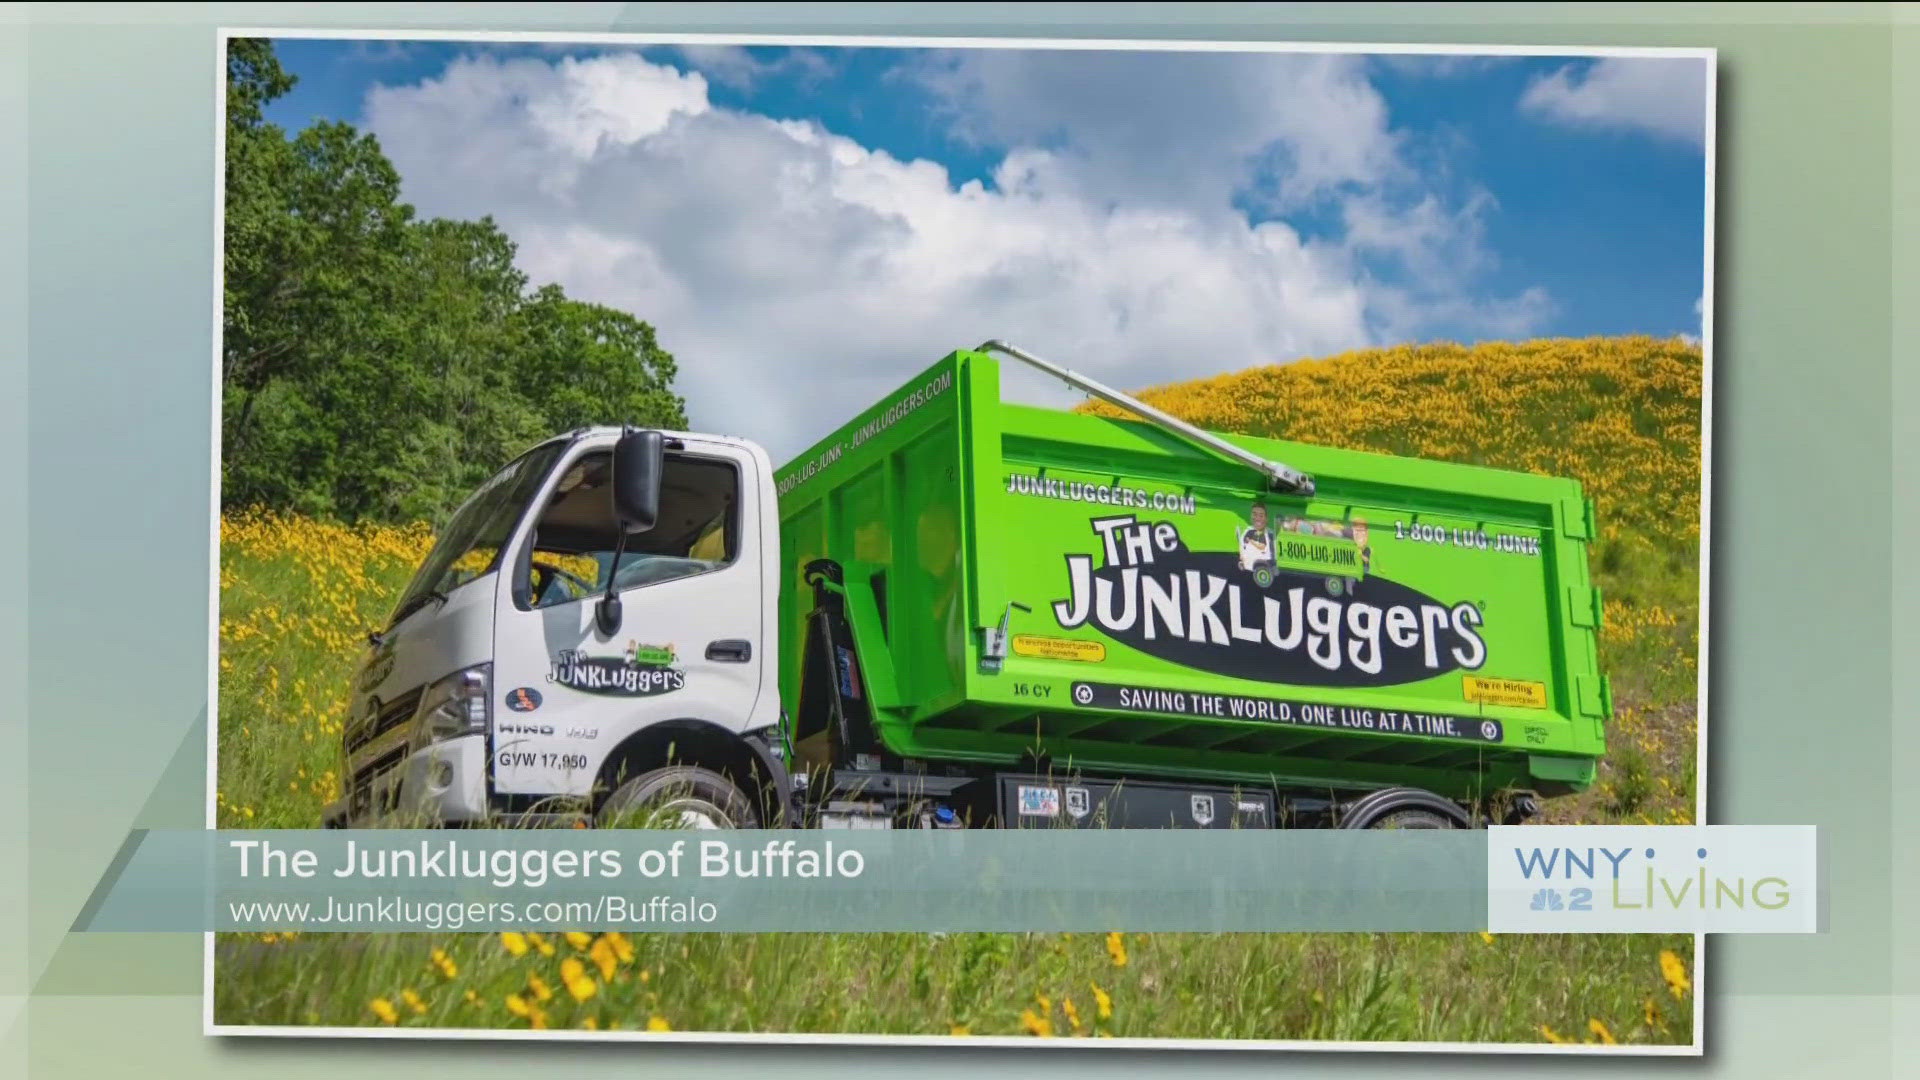 WNY Living- April 27th- The Junkluggers of Buffalo (THIS VIDEO IS SPONOSORED BY THE JUNKLUGGERS OF BUFFALO)